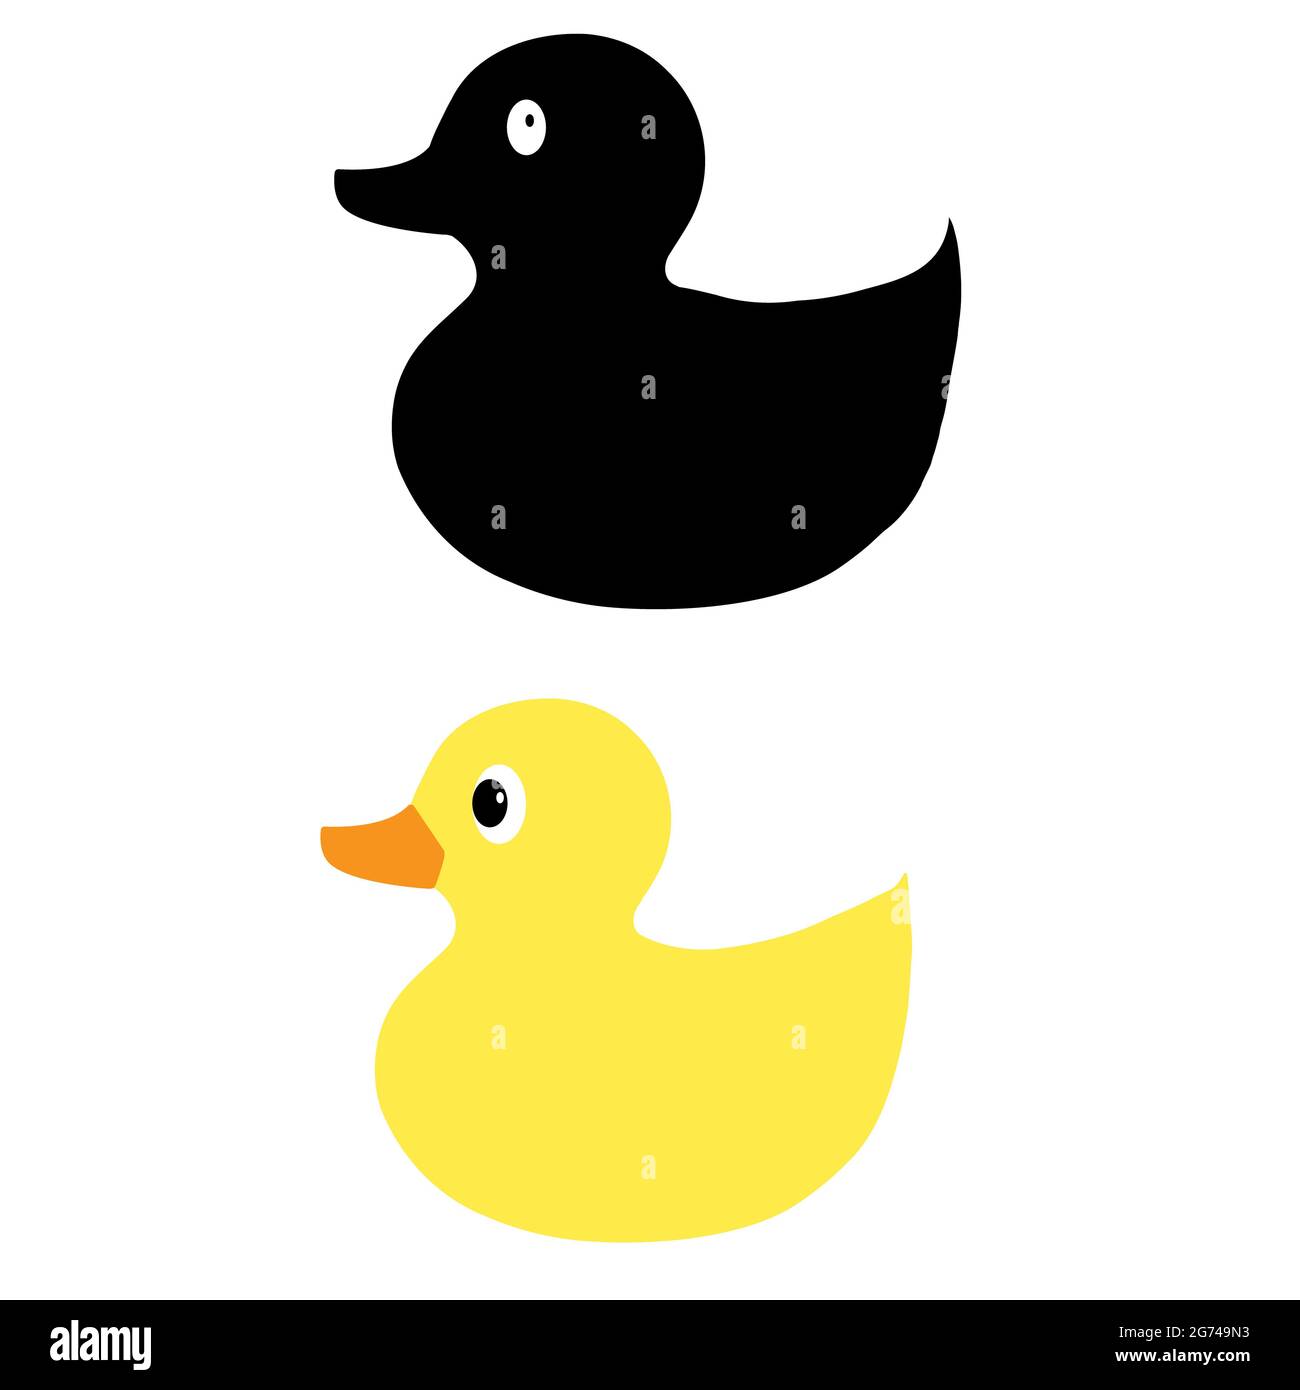 rubber duck icon on white background. ducky bath toy sign. duck symbol. flat style. Stock Photo